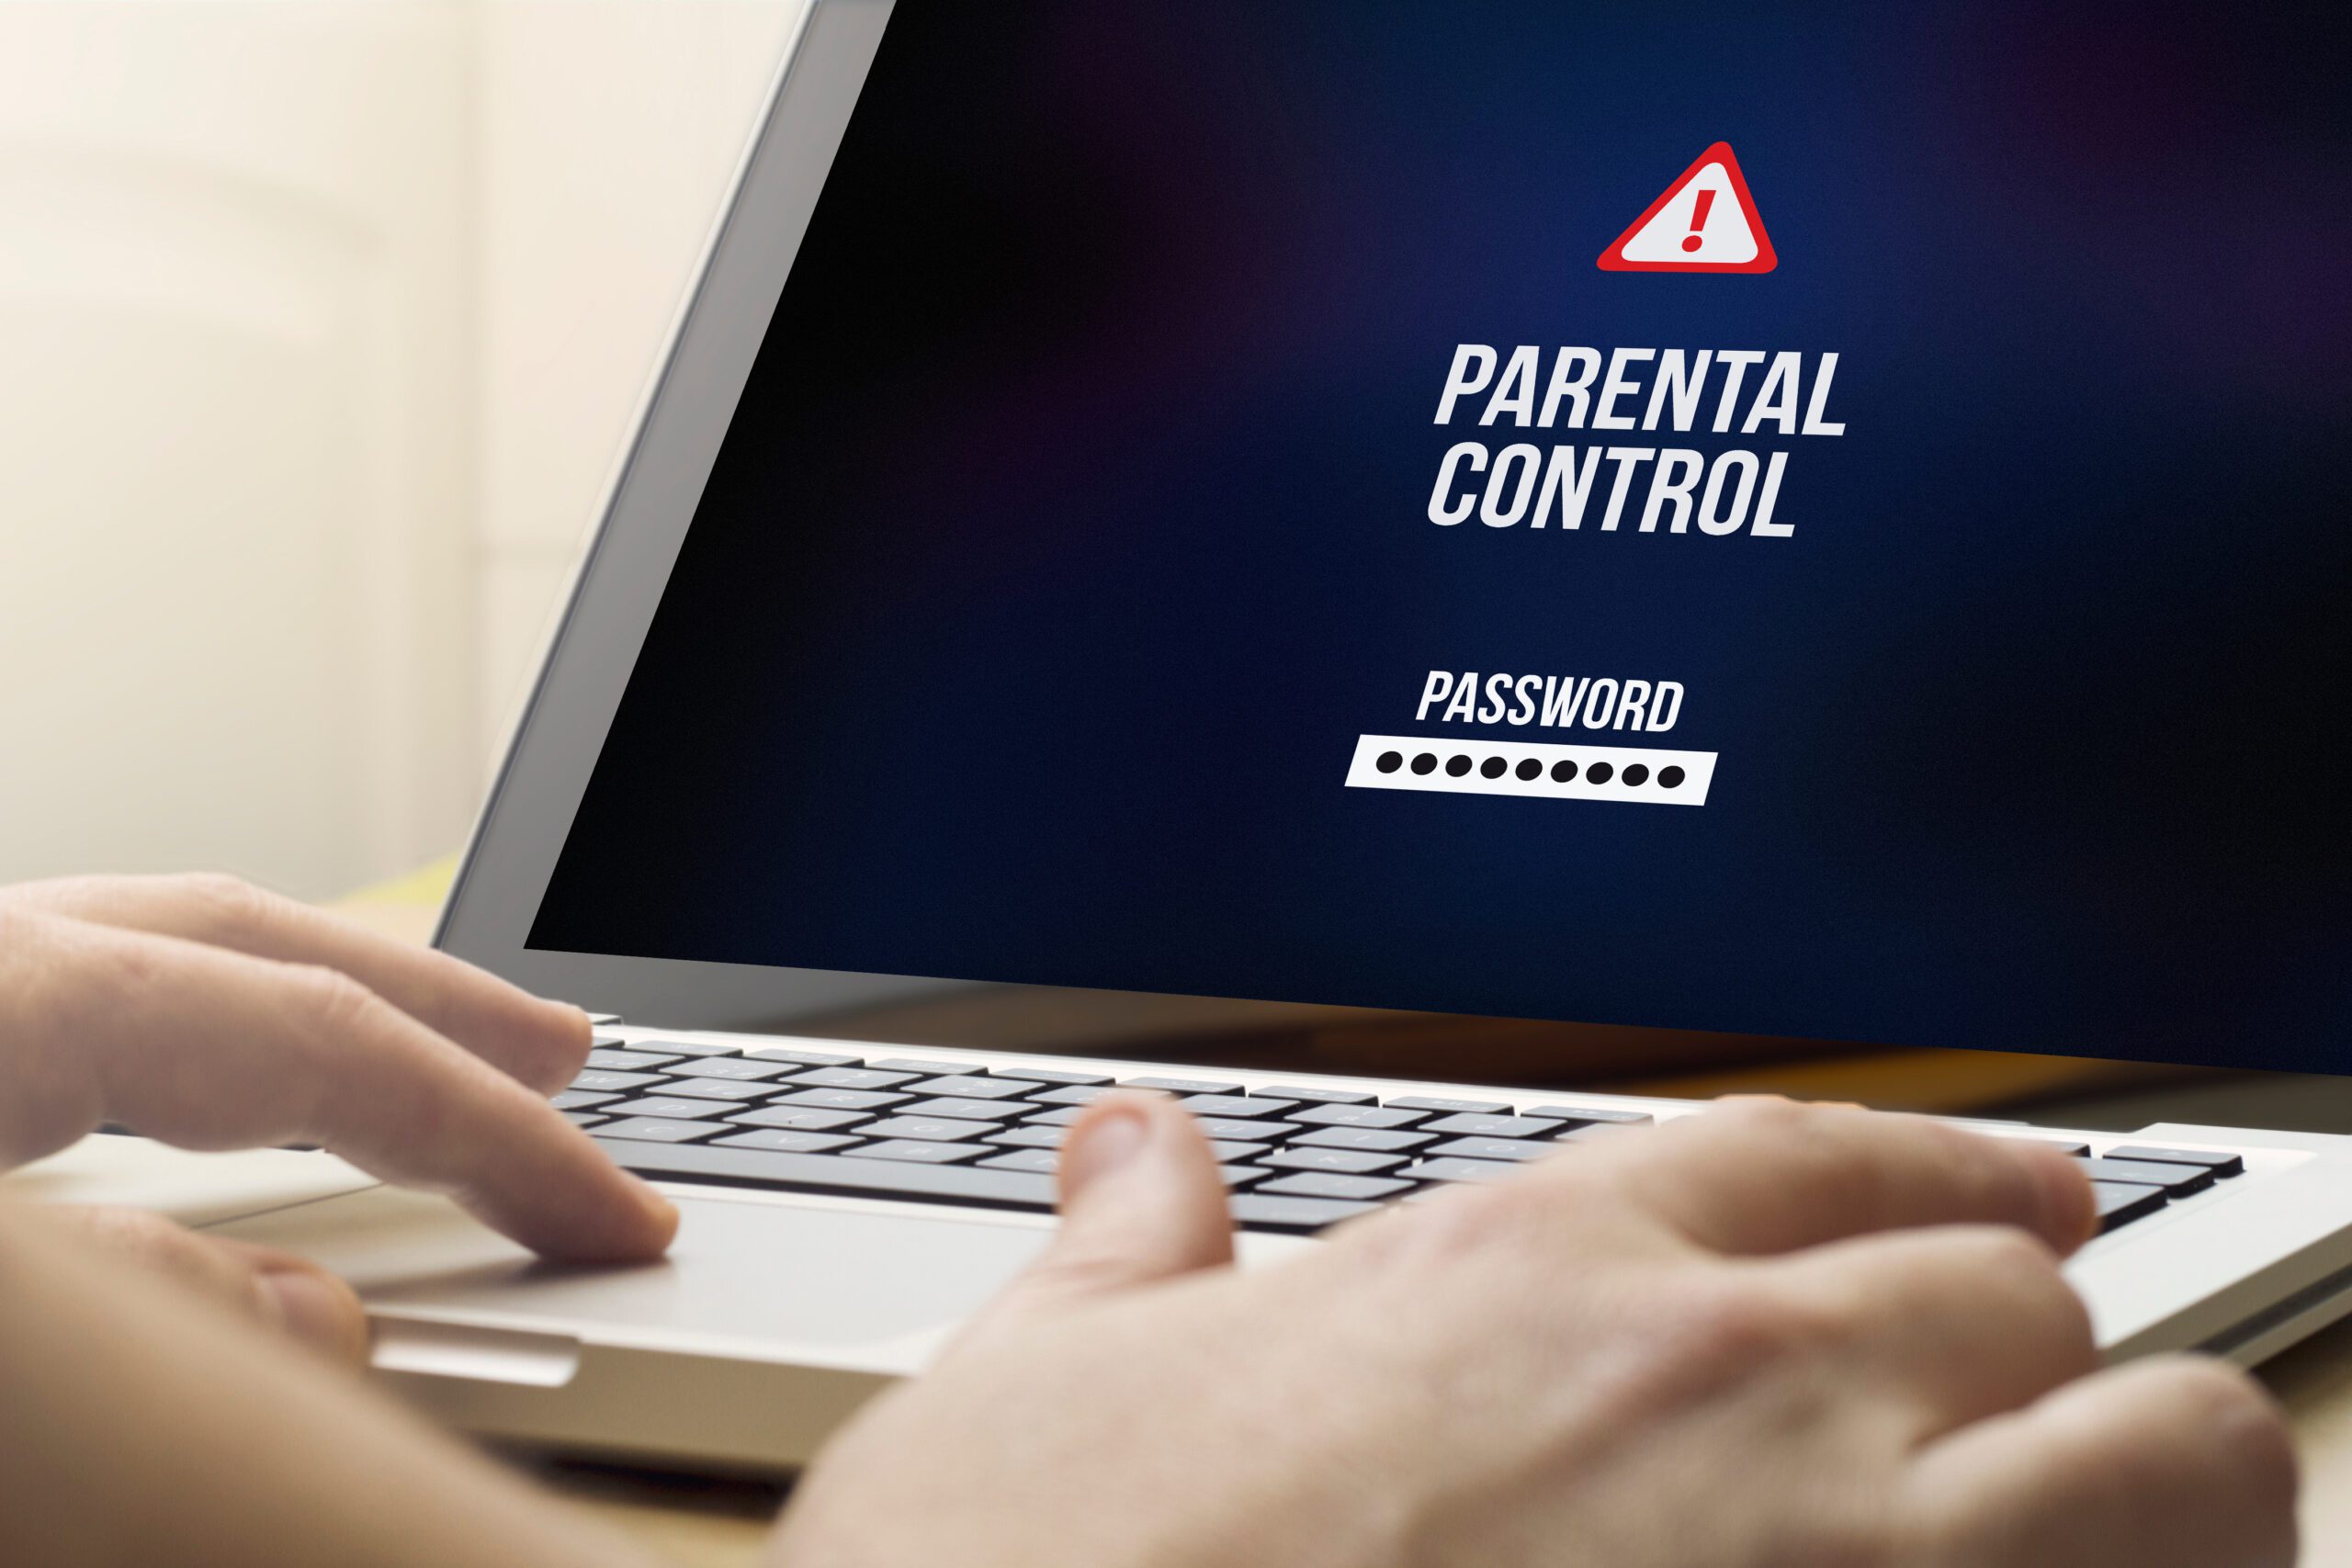 A person is using a laptop displaying a "parental control" login screen, asking for a password, symbolized by an alert icon. hands are shown typing on the keyboard.